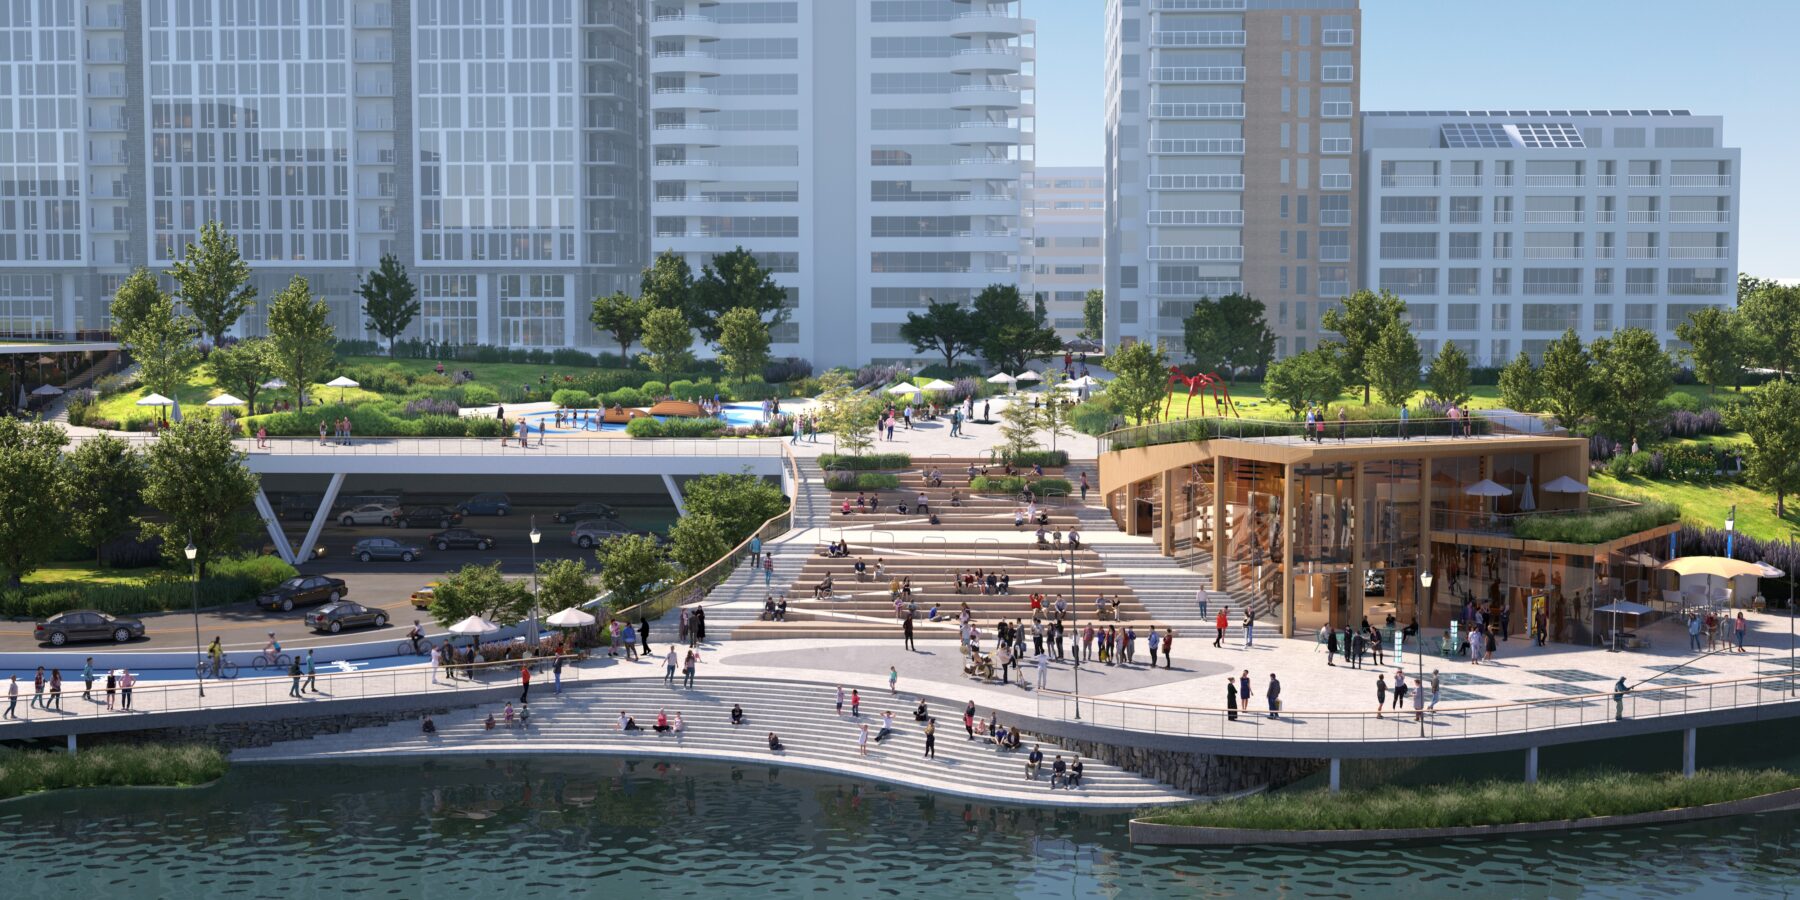 rendering of waterfront park with people occupying steps on dock and concessions